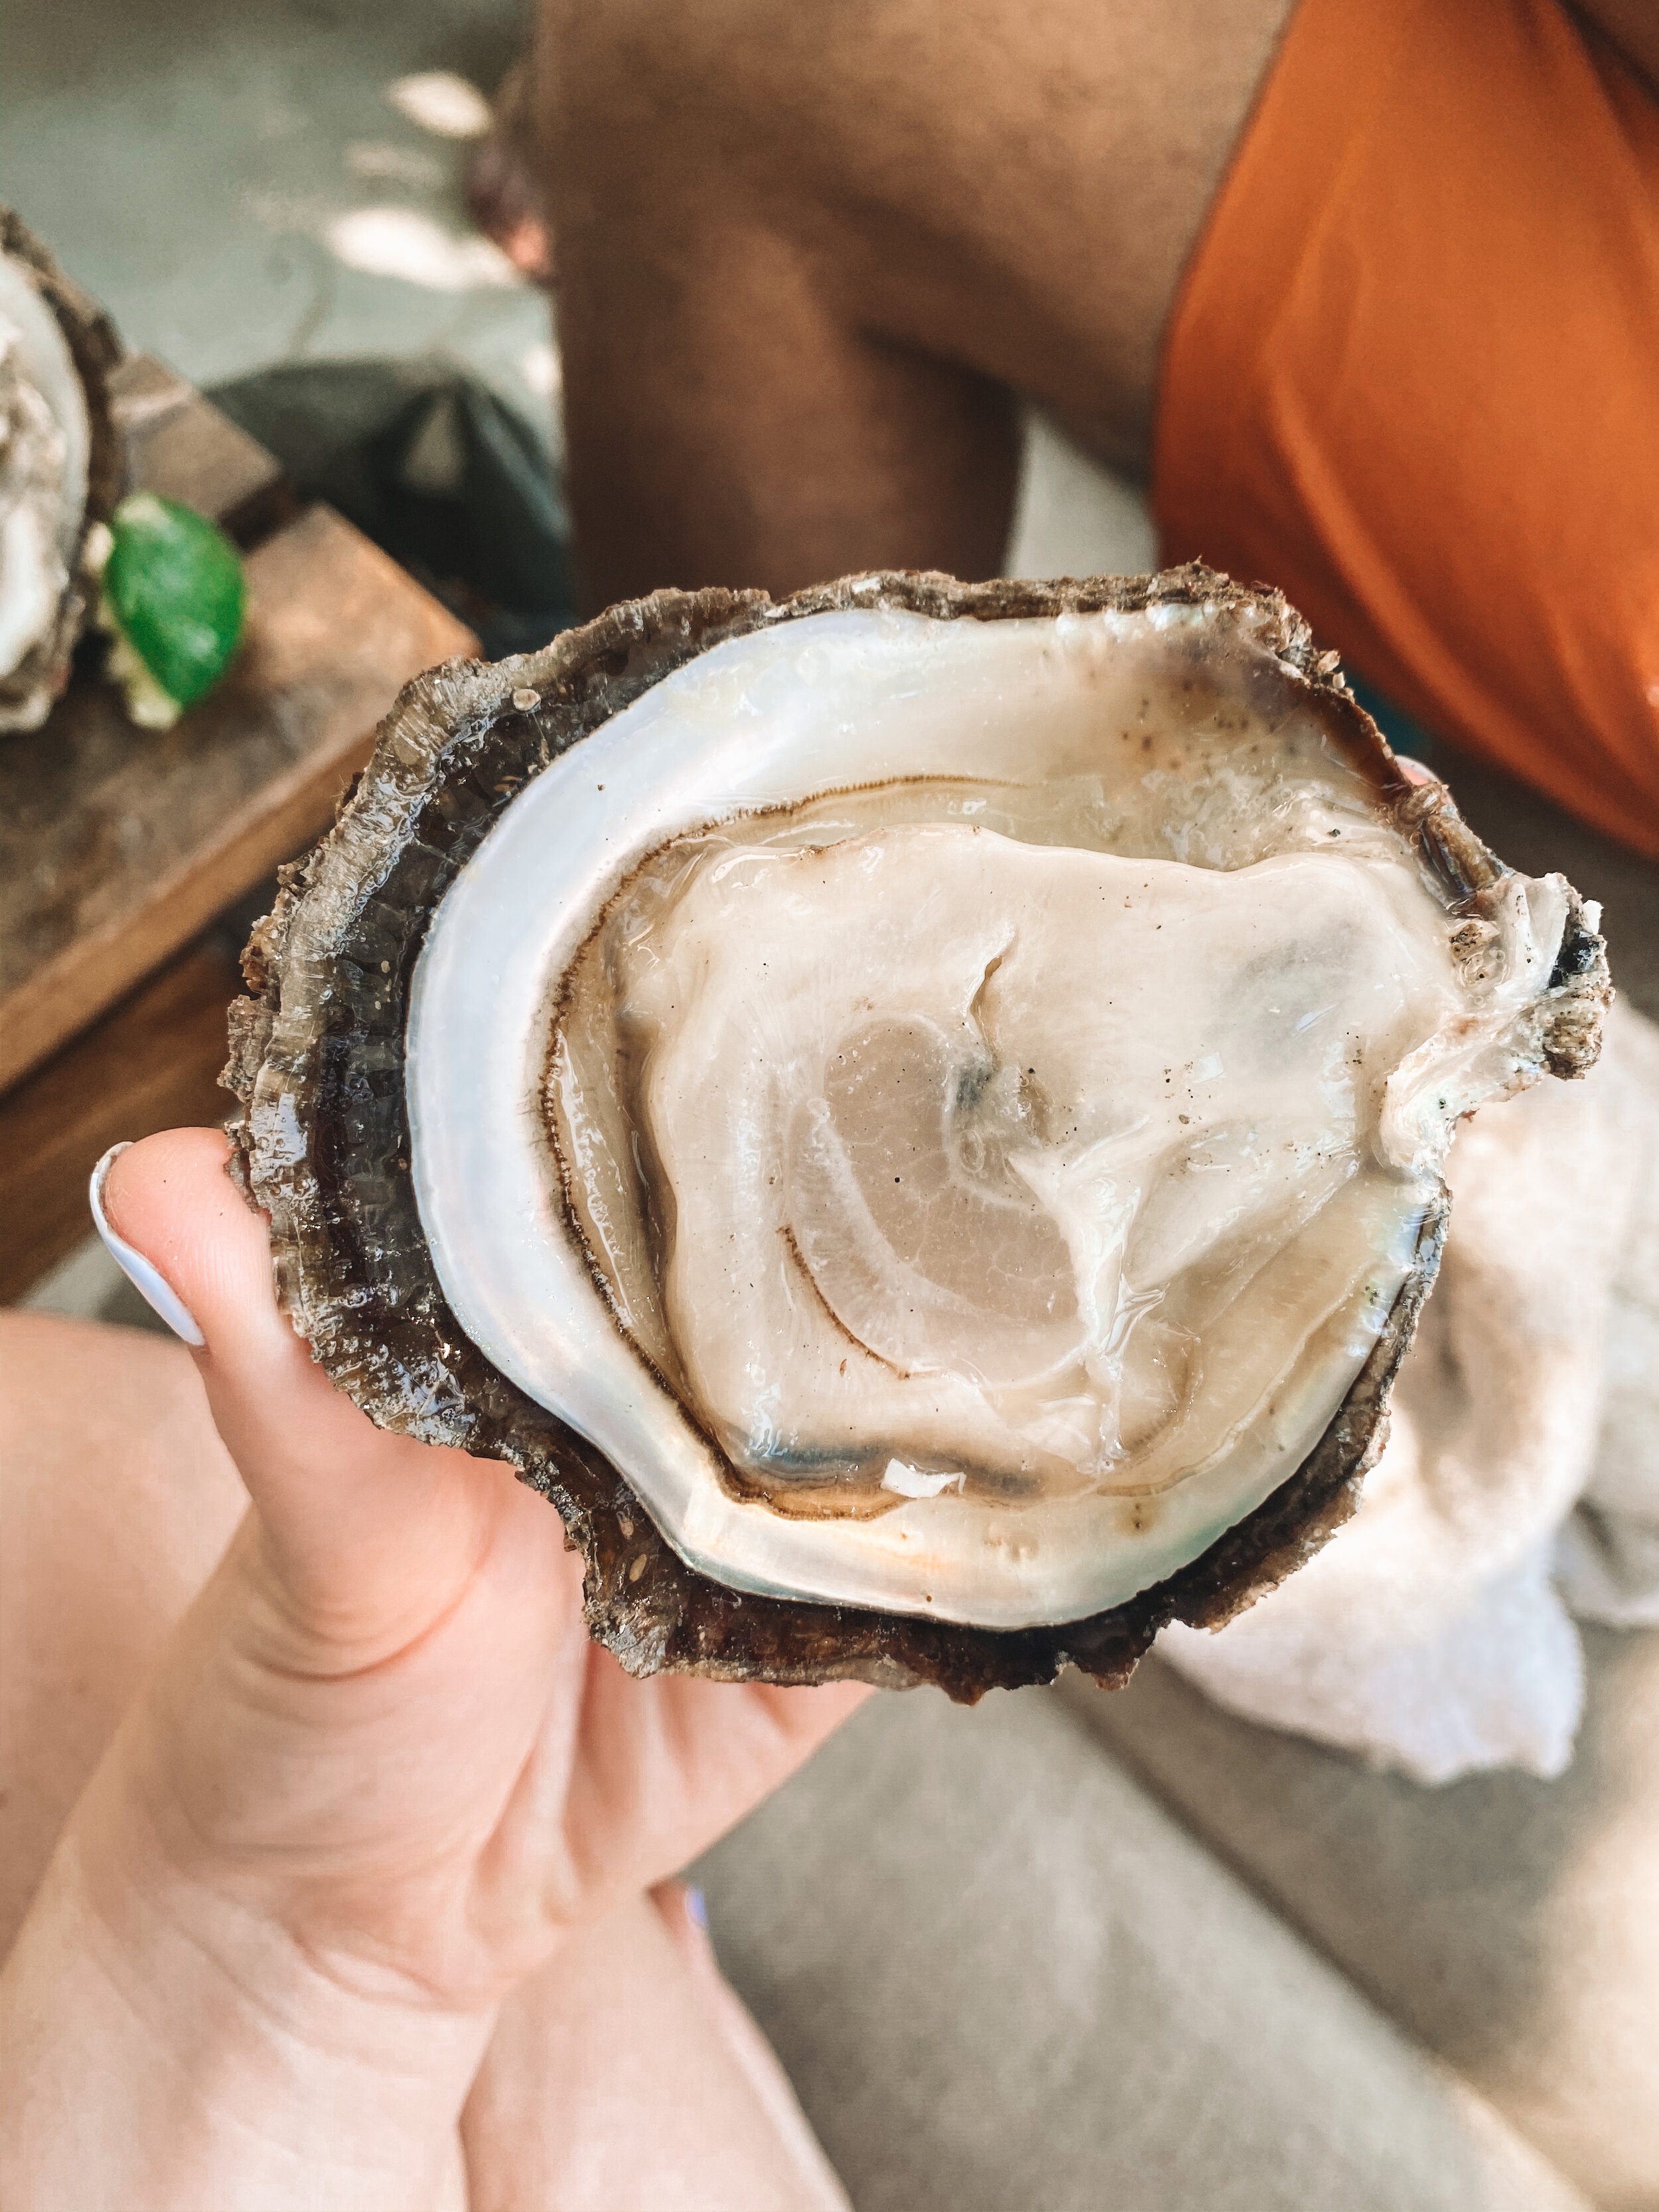 Raw oysters from the local fishermen